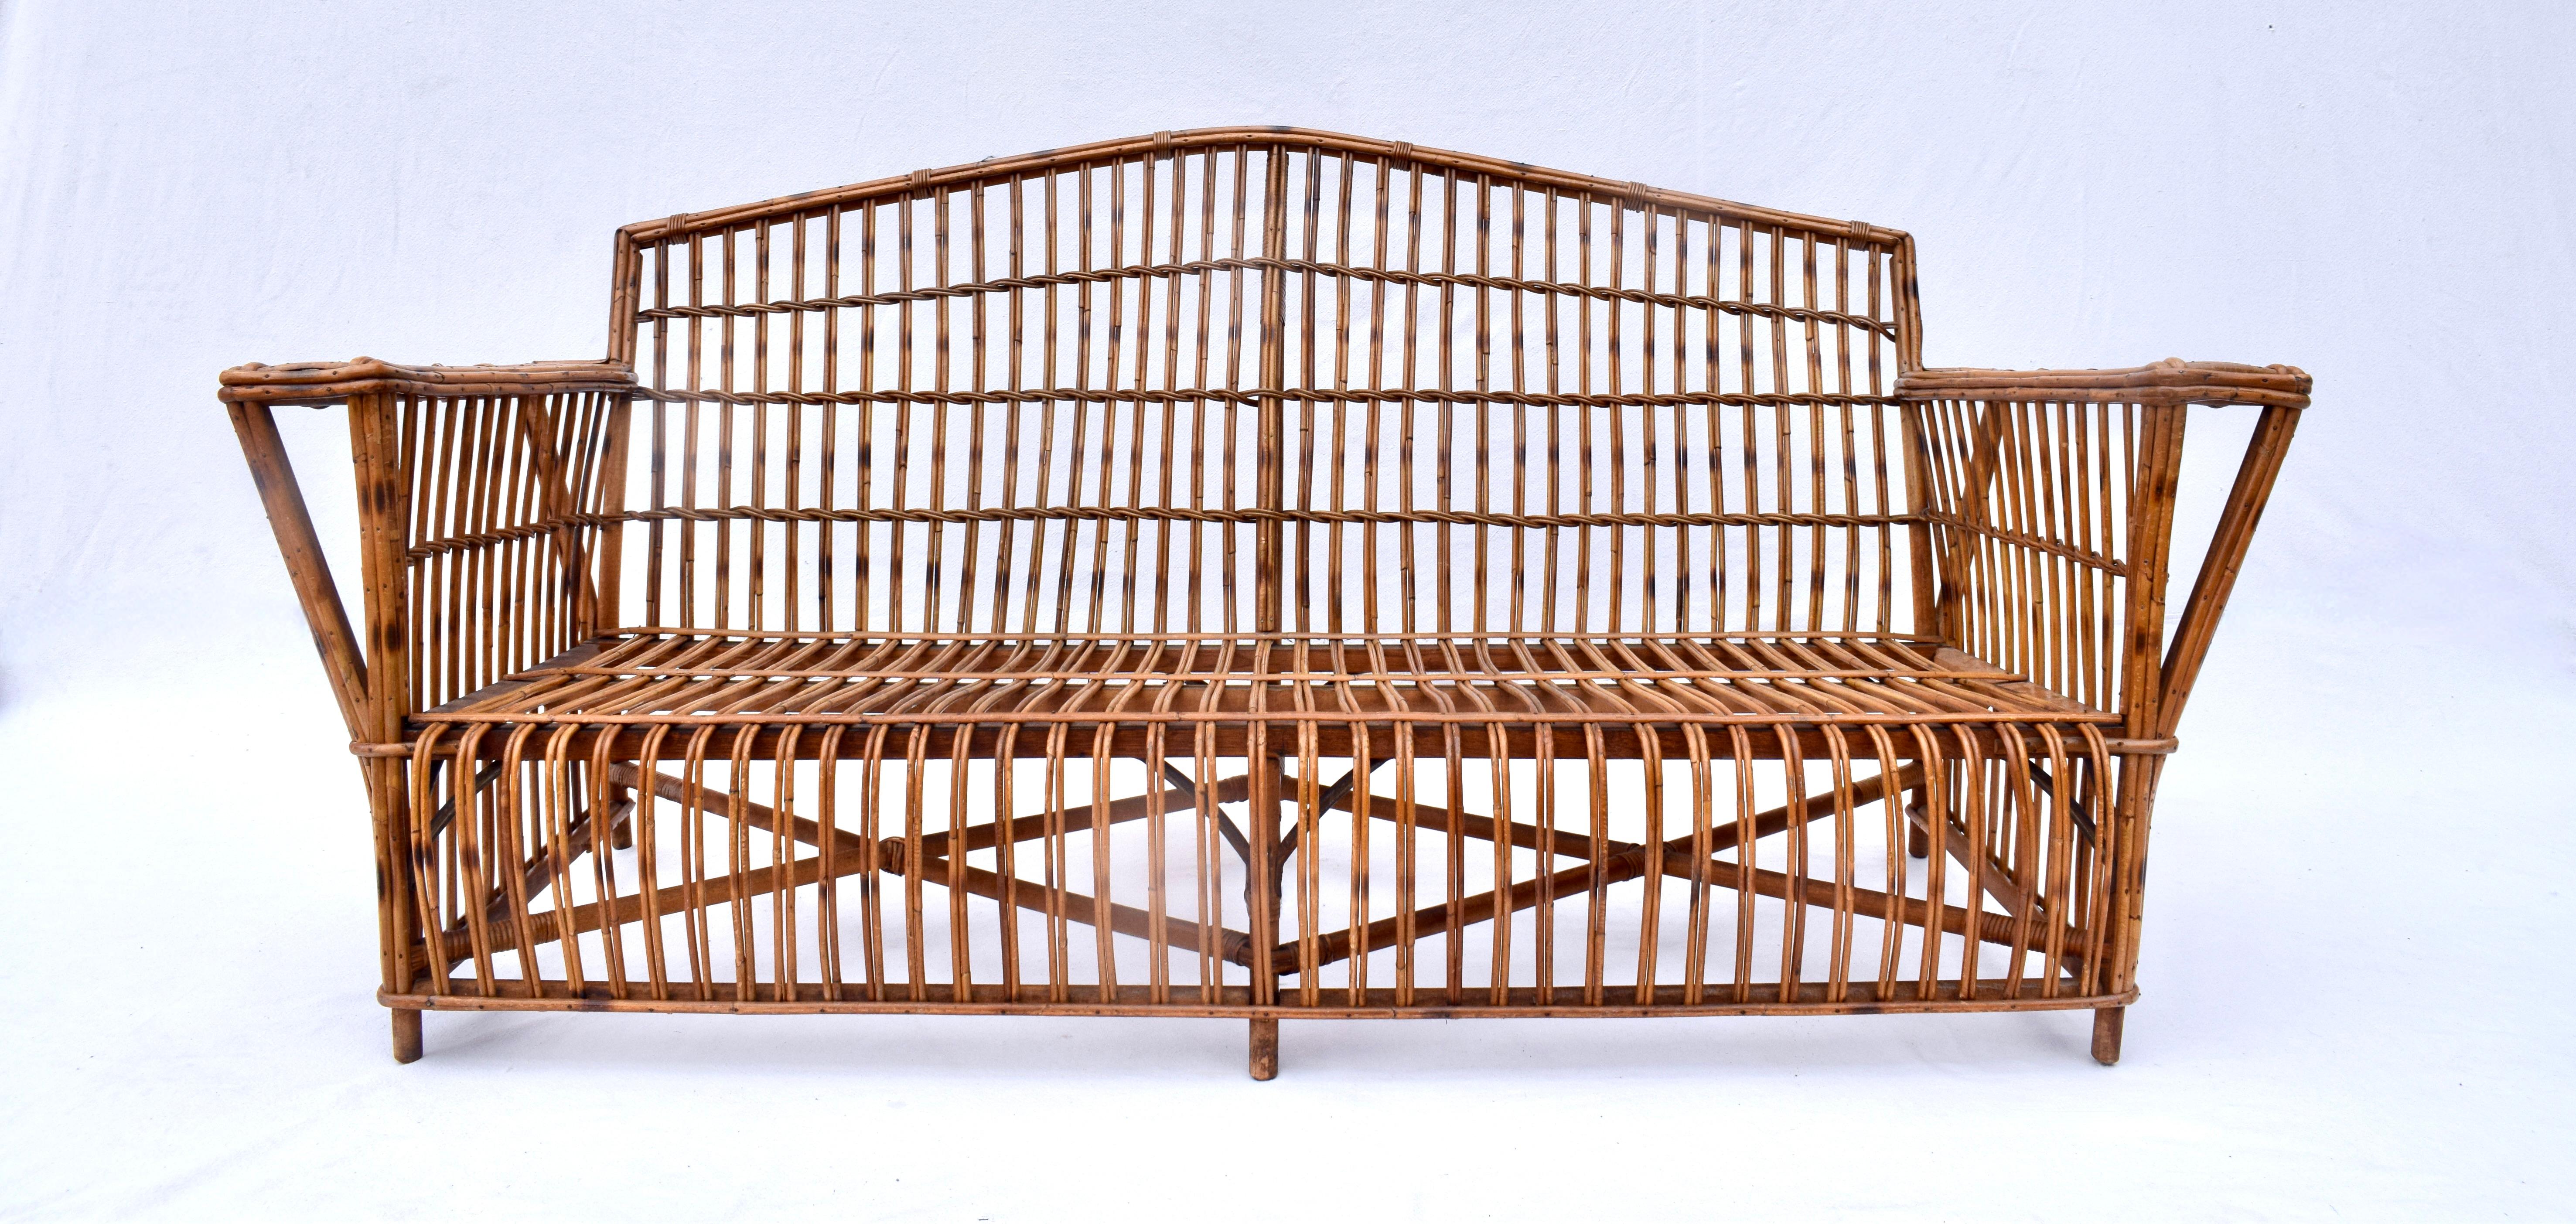 An early 20th c. stick wicker reed rattan sofa with original natural chestnut finish & new custom cushions. Nice mid size exquisitely maintained & fully hand detailed ready for use.  Seat/ Arm Dimensions: 18